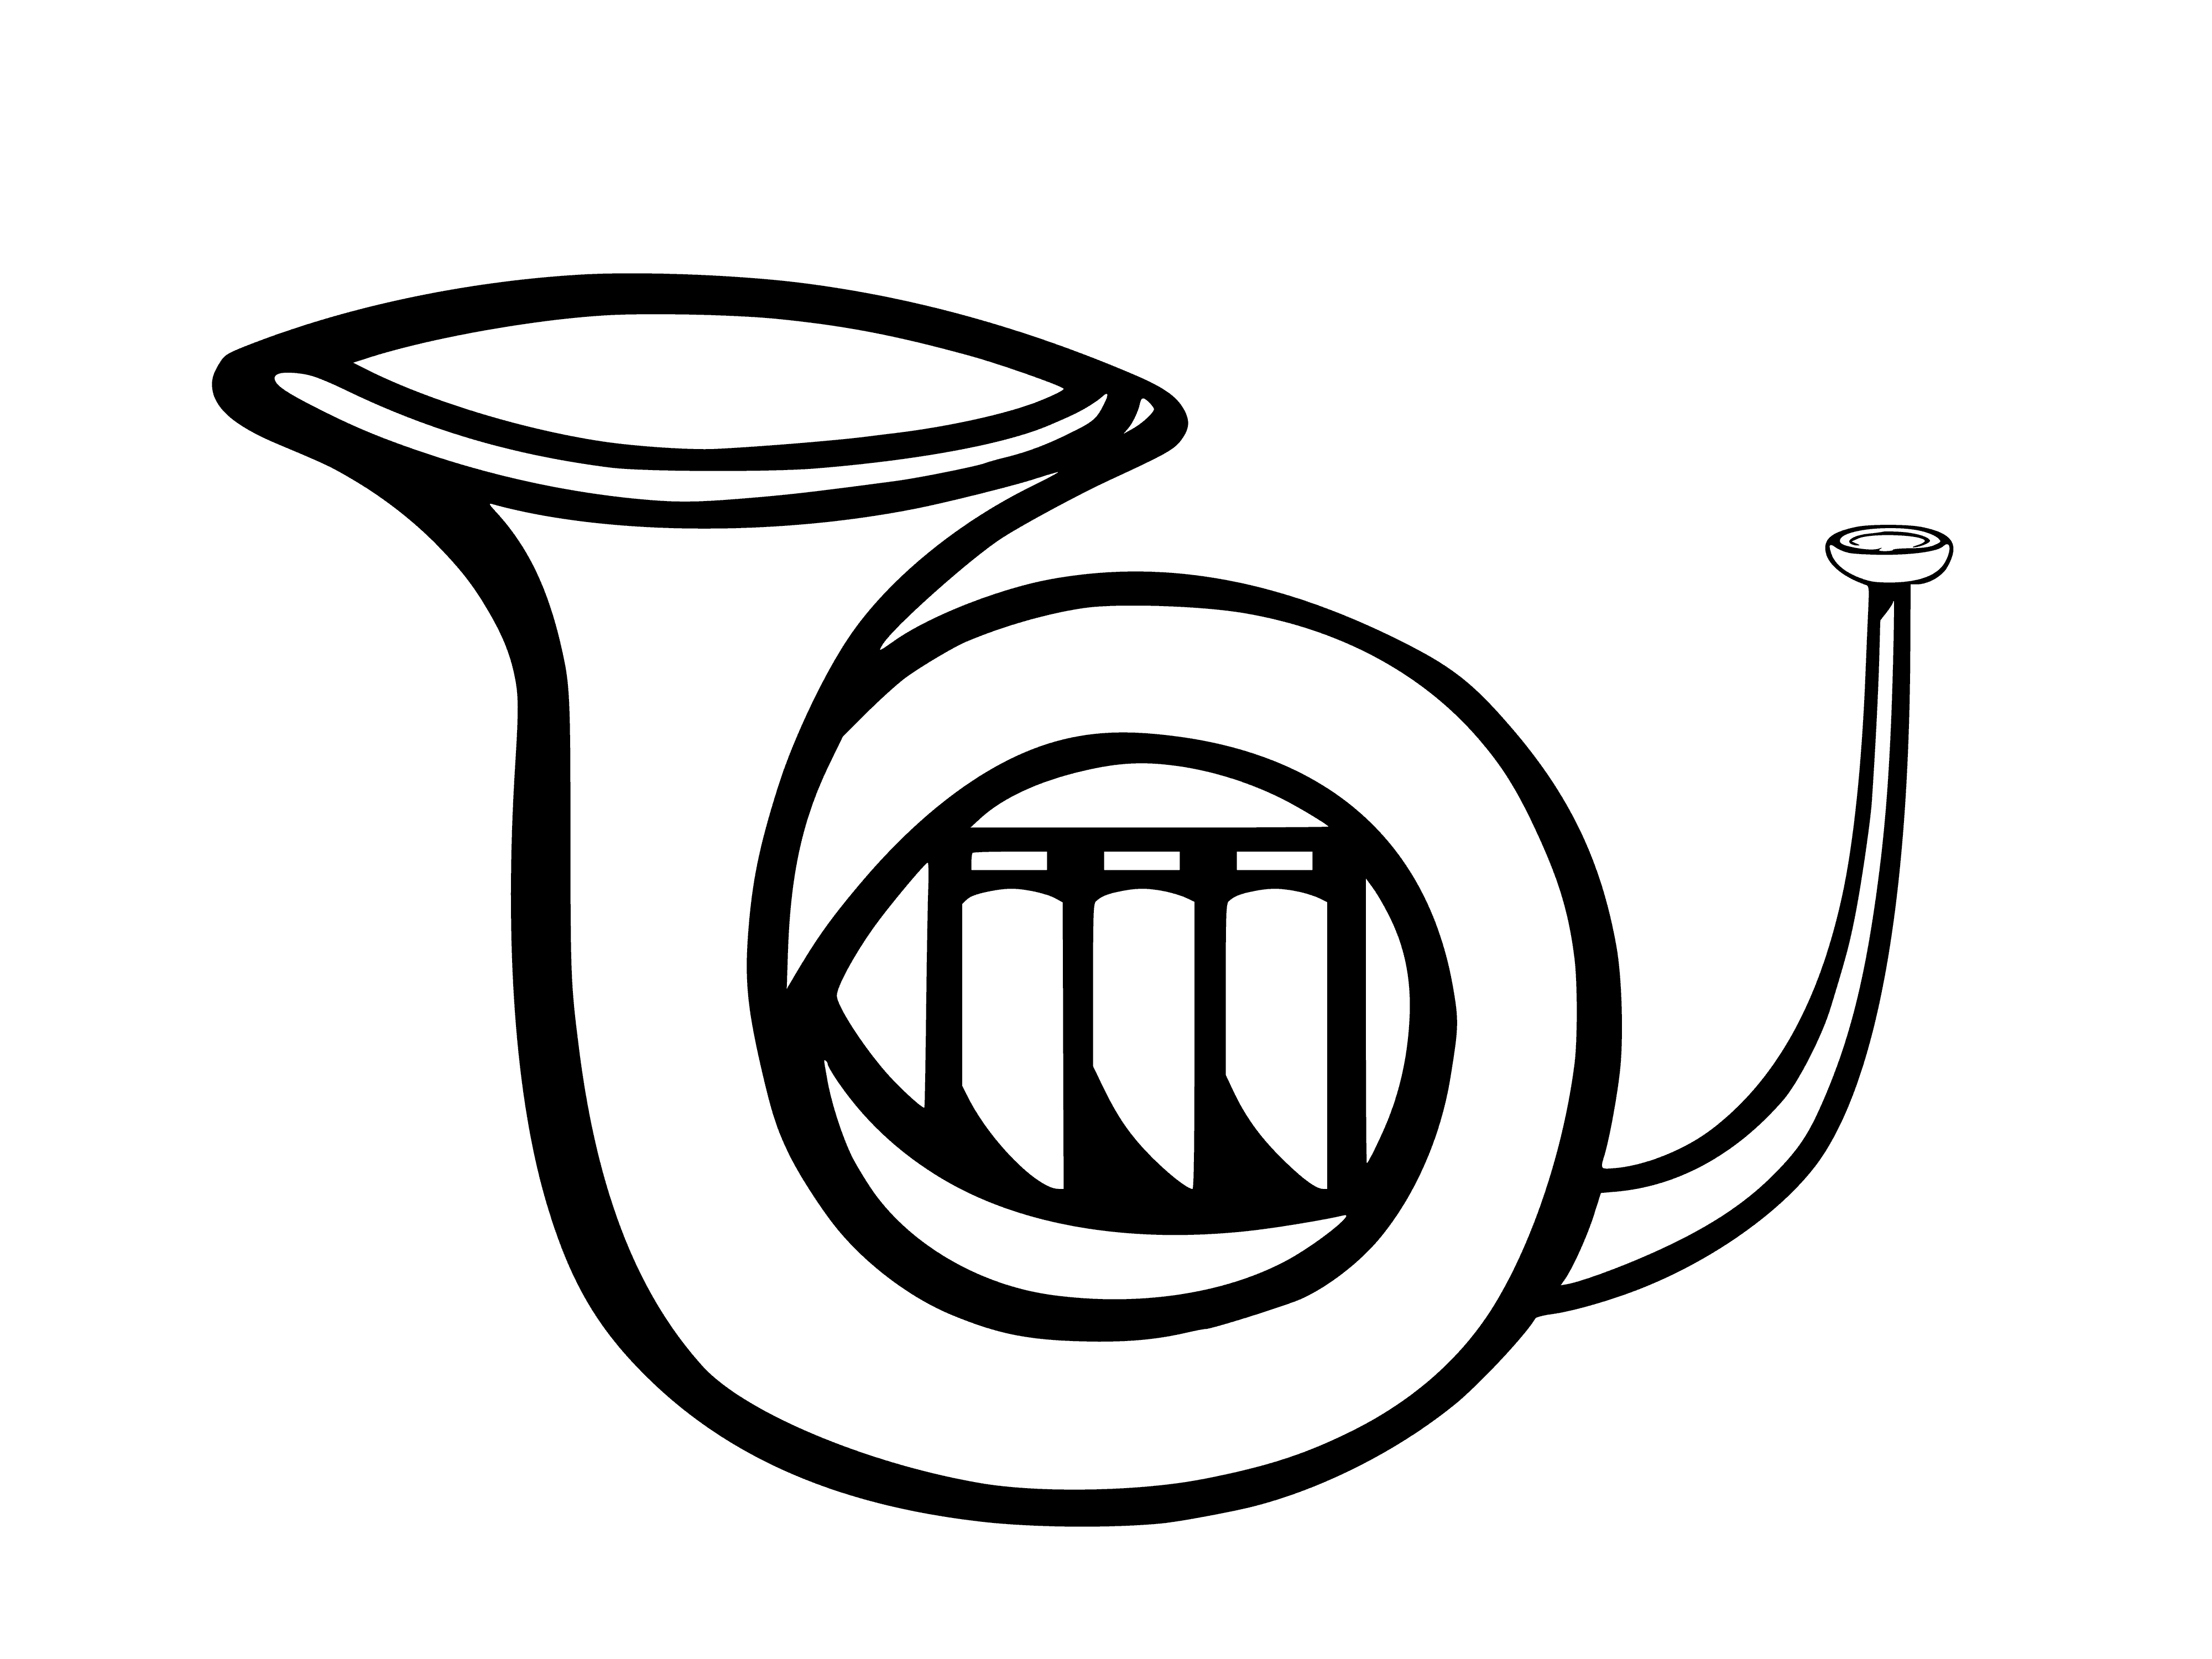 coloring page: French horn on black stand has long spiral, large brass bell, mouthpiece; held up by metal rod through center.